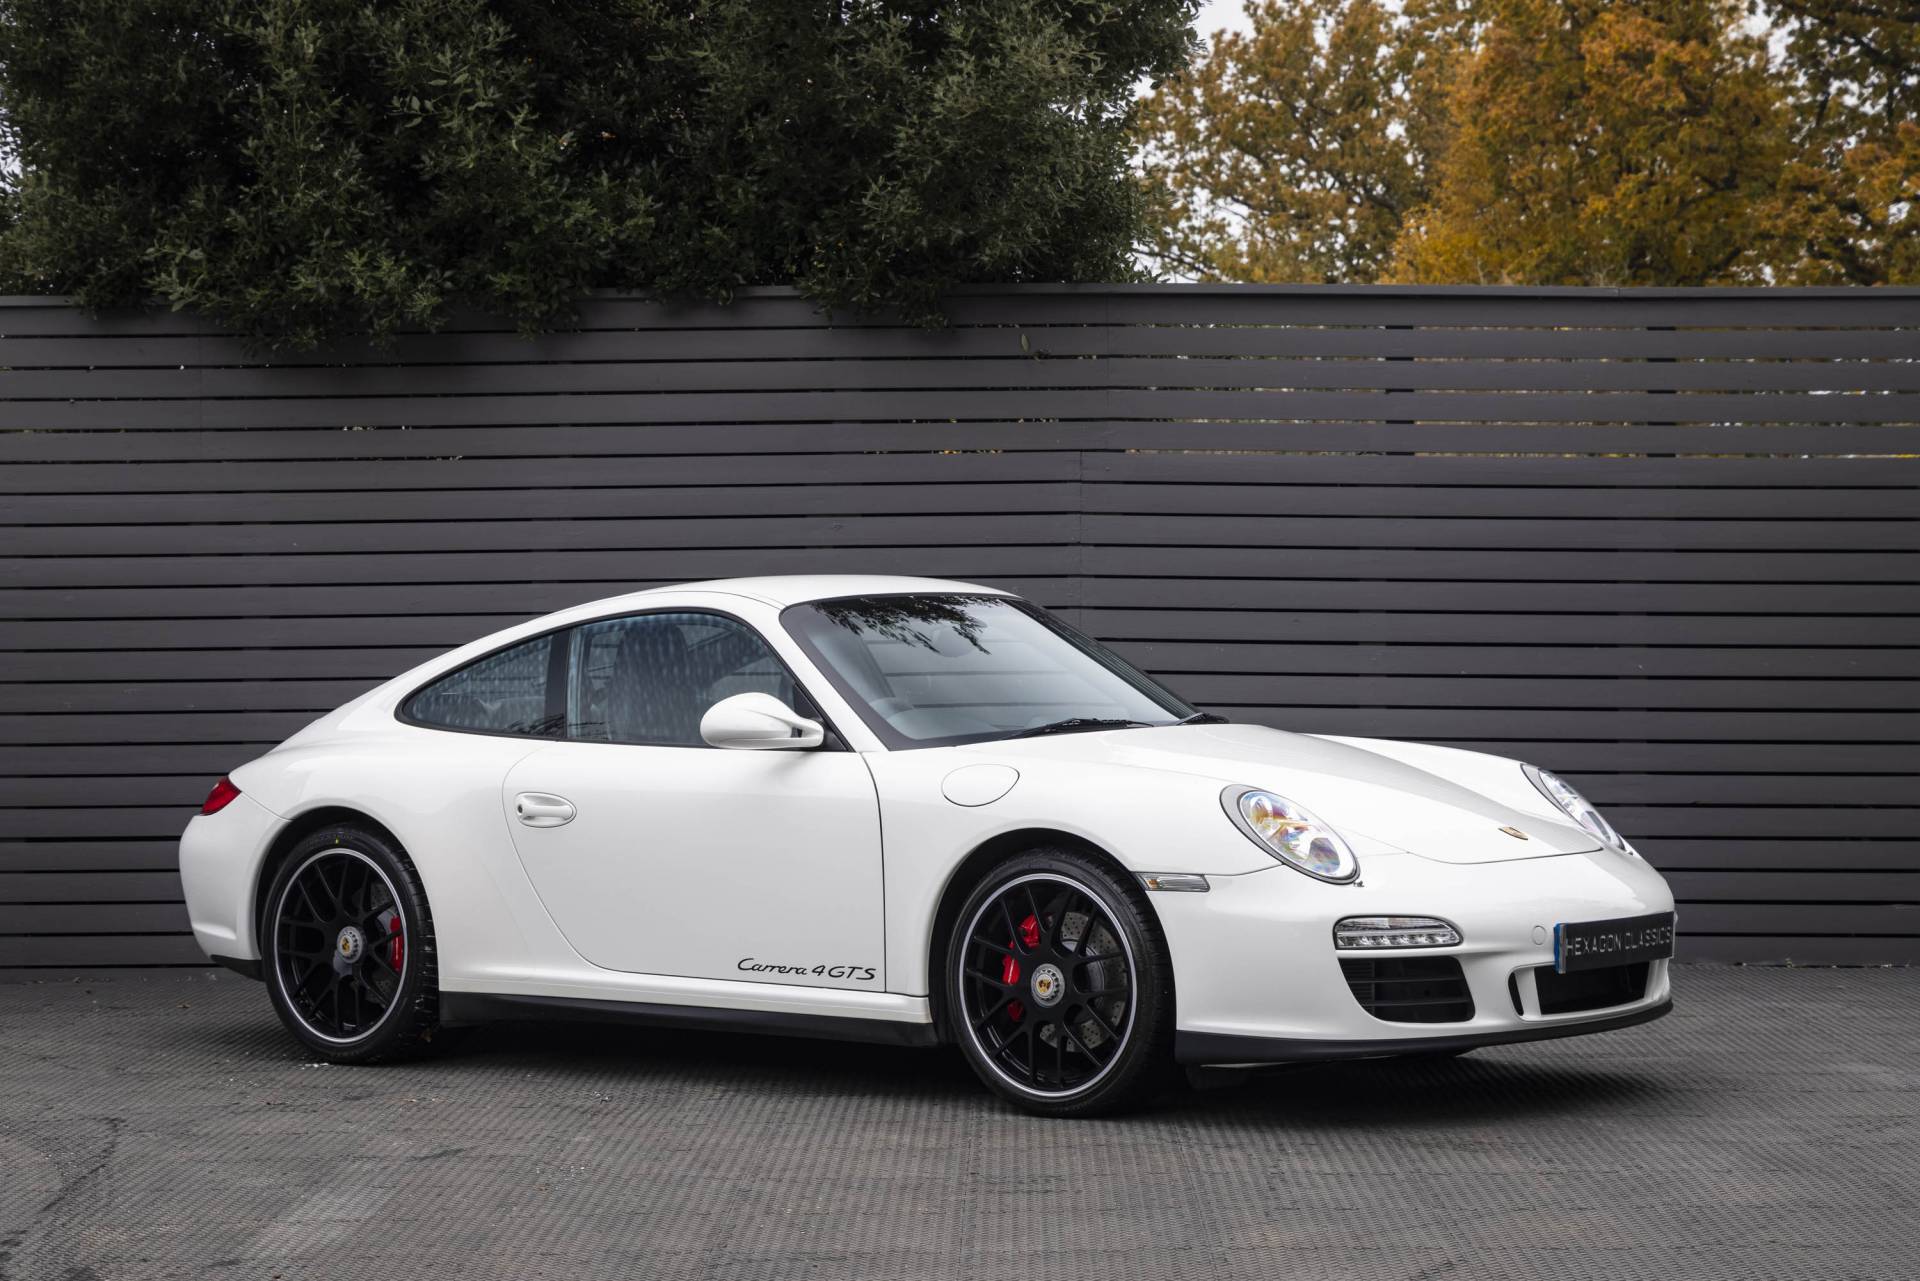 For Sale: Porsche 911 Carrera 4 GTS (2012) offered for GBP 72,995